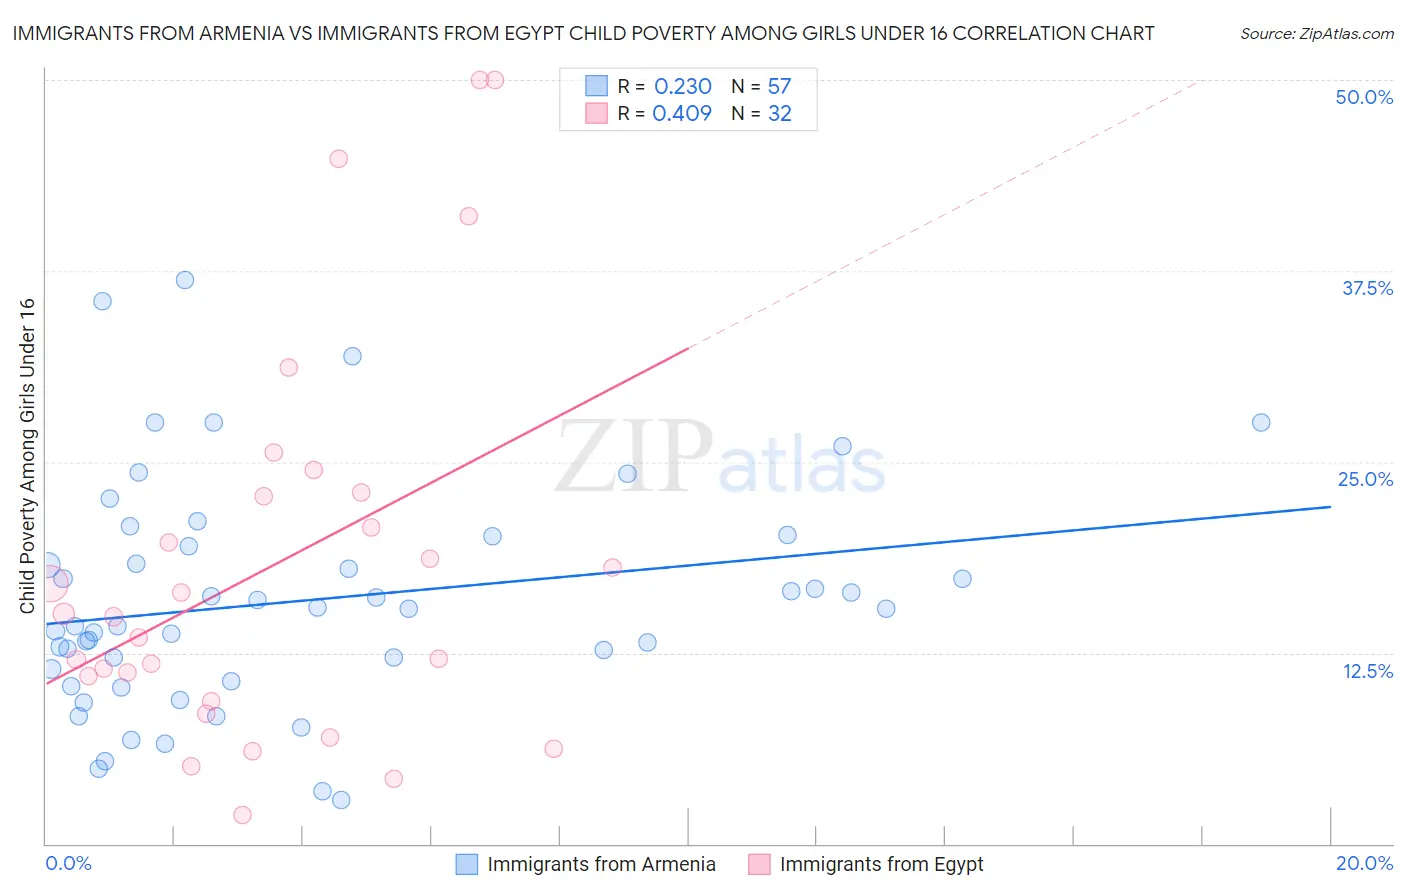 Immigrants from Armenia vs Immigrants from Egypt Child Poverty Among Girls Under 16